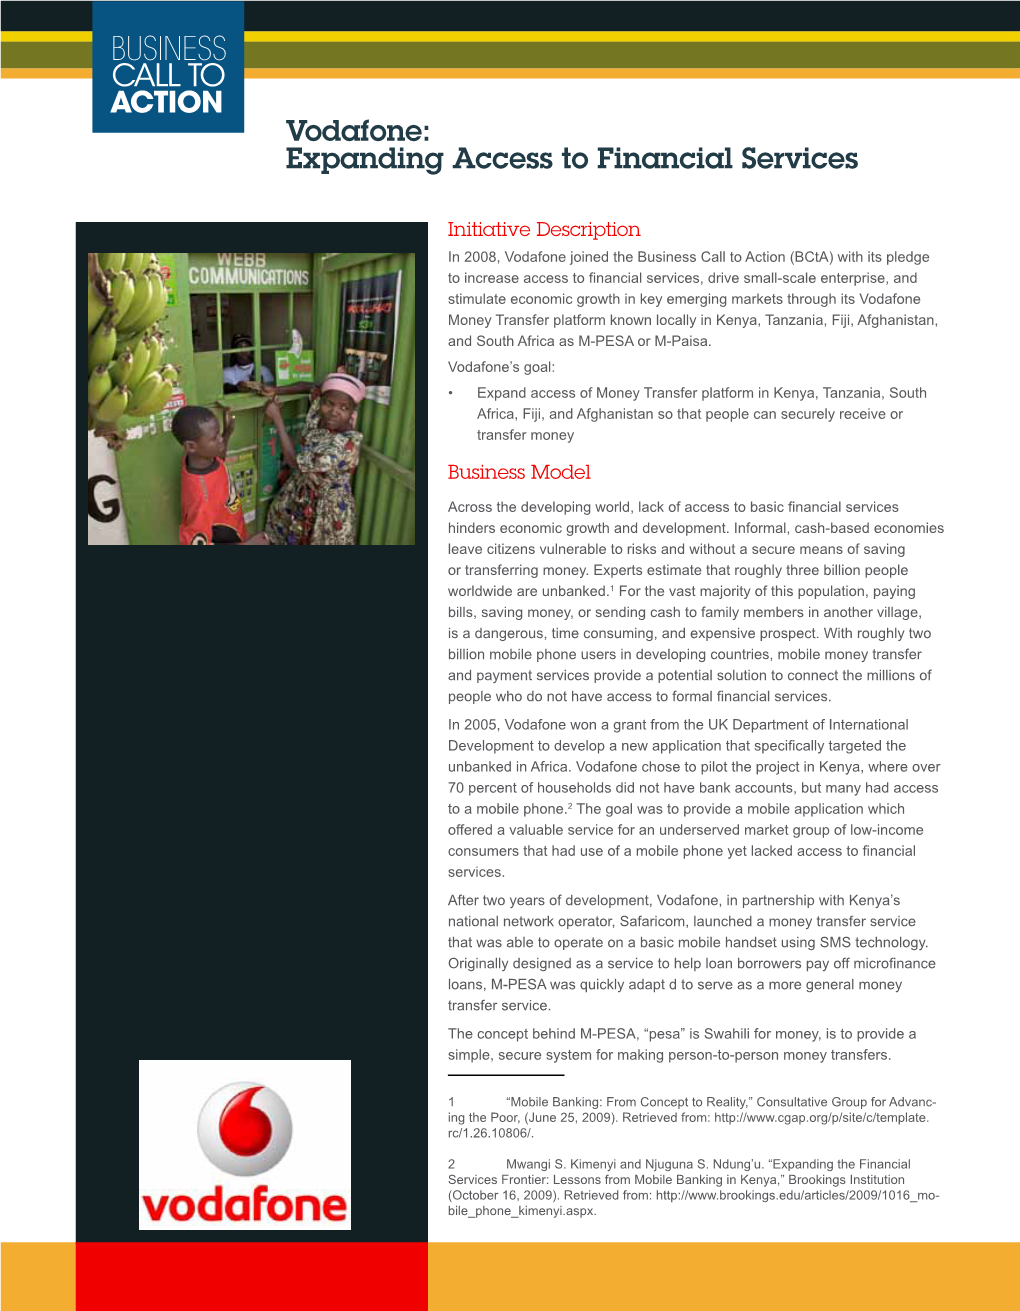 Vodafone: Expanding Access to Financial Services